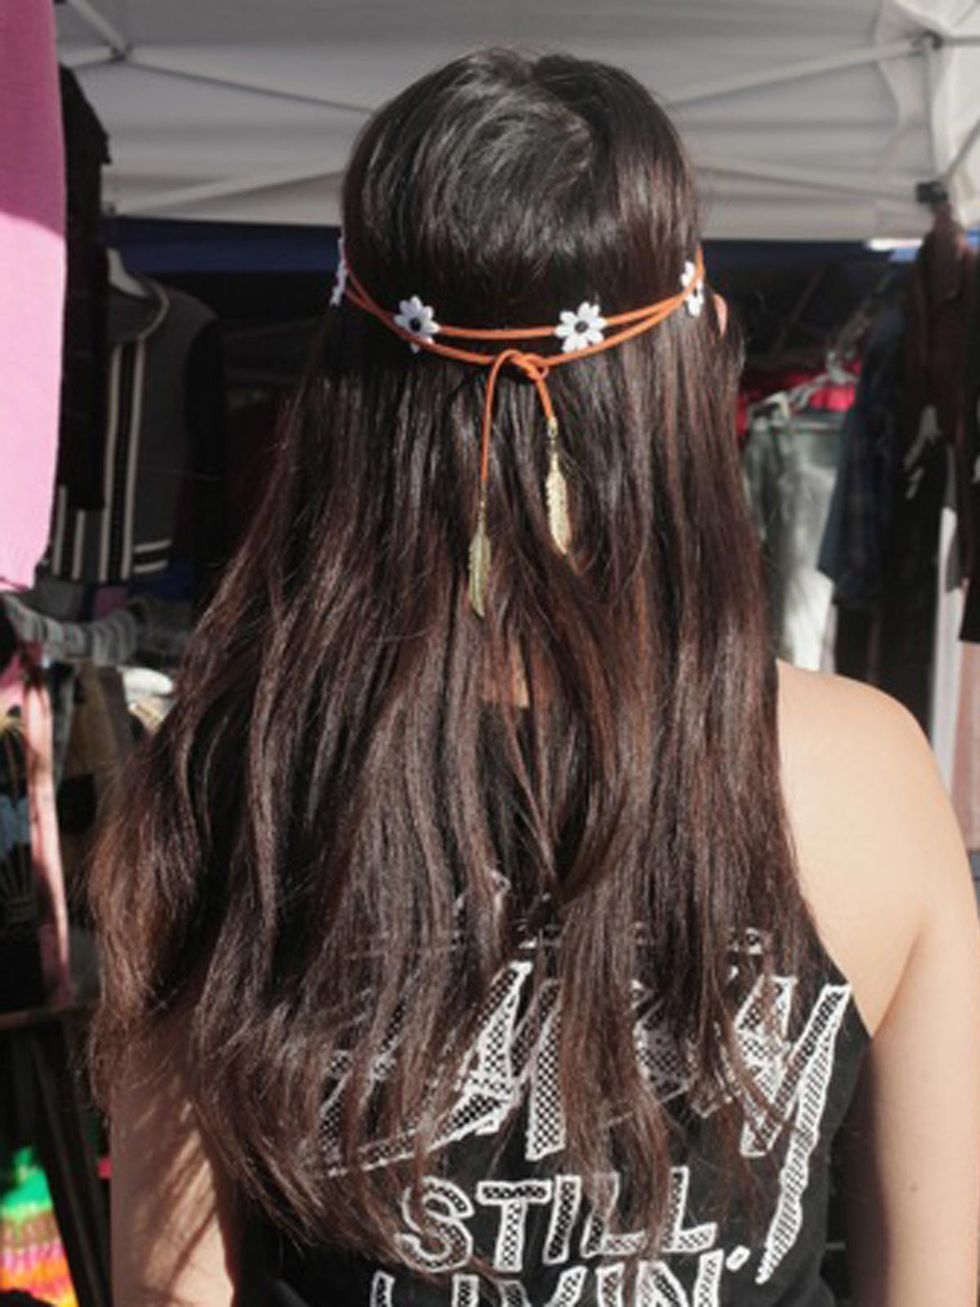 Hairstyle, Sleeveless shirt, Style, Costume accessory, Long hair, Hair accessory, Brown hair, Musical instrument accessory, Back, Active tank, 